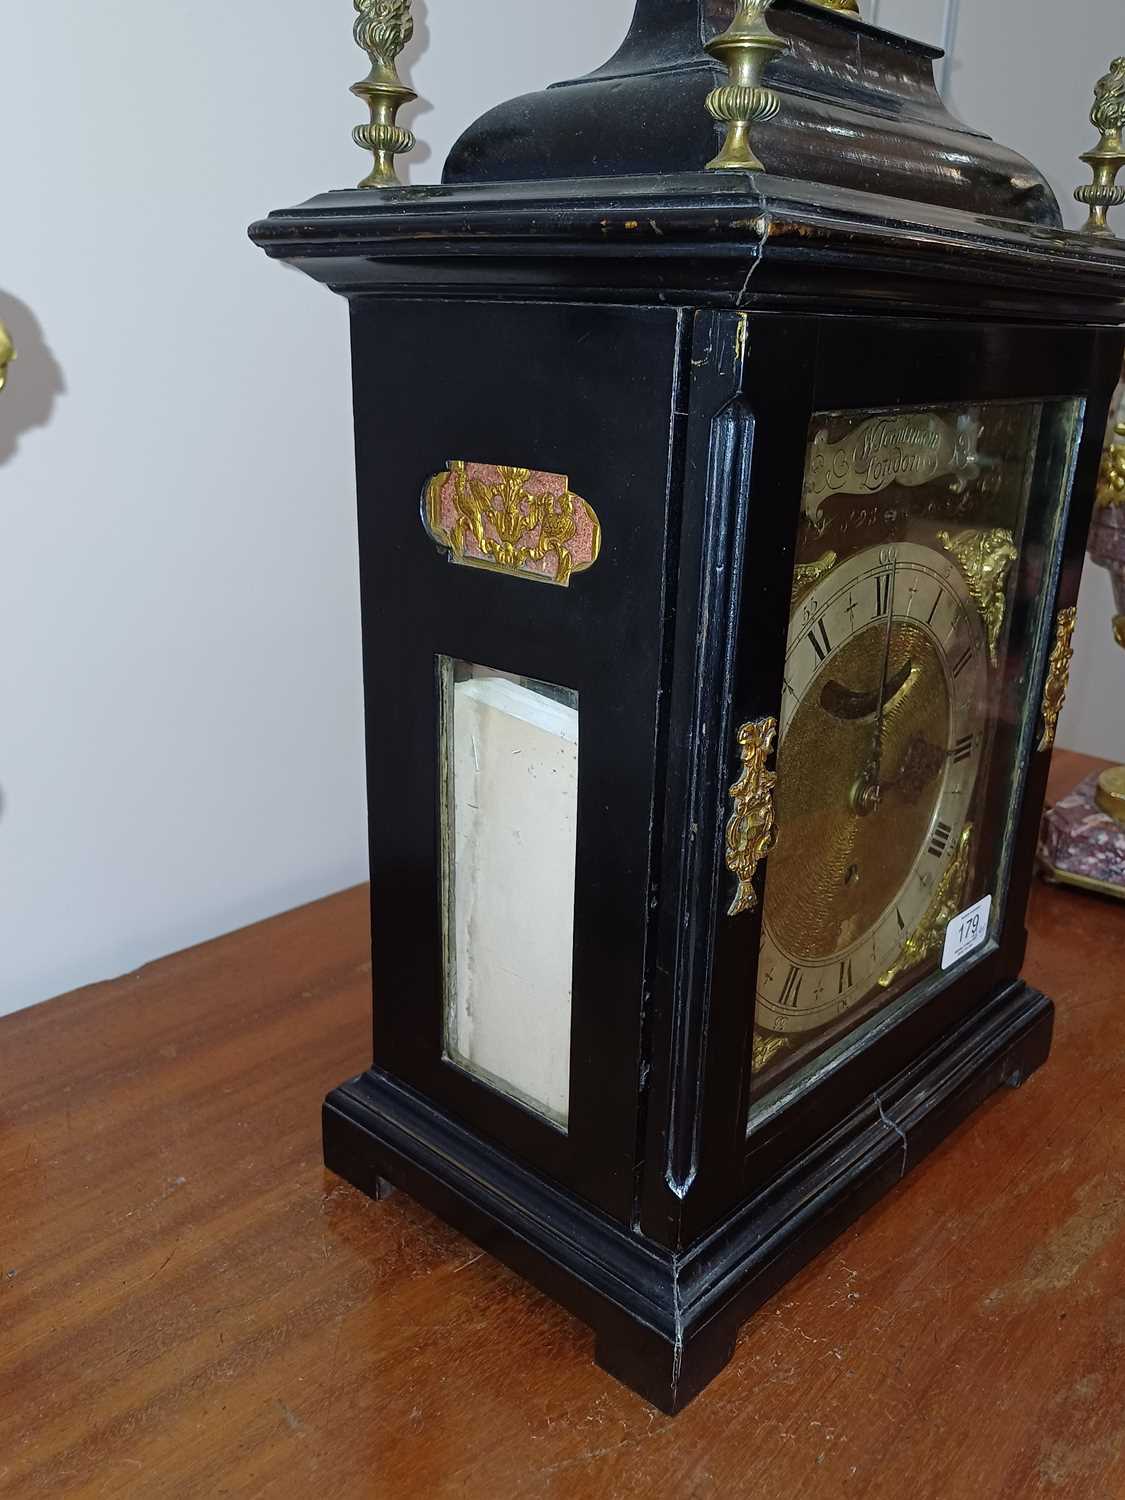 An Ebonised Chiming Table Clock, signed W Tomlinson, London, early 18th century, inverted bell top - Image 19 of 25